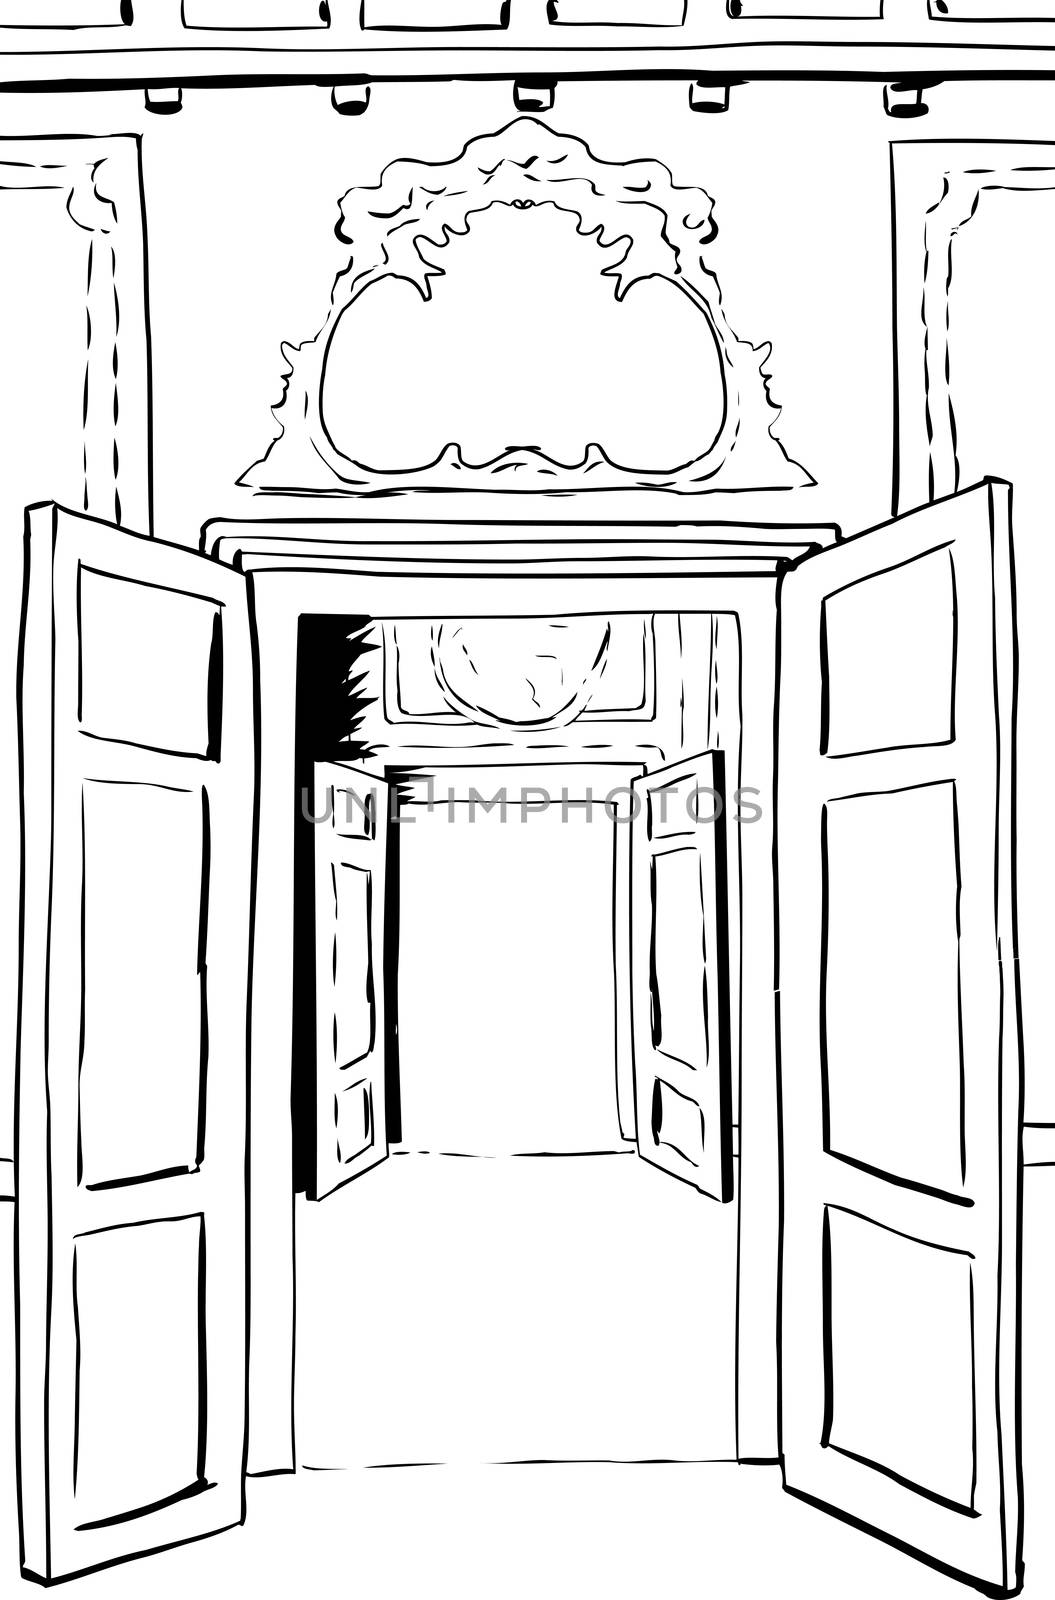 Outlined Open Doorways in Stockholm Palace by TheBlackRhino